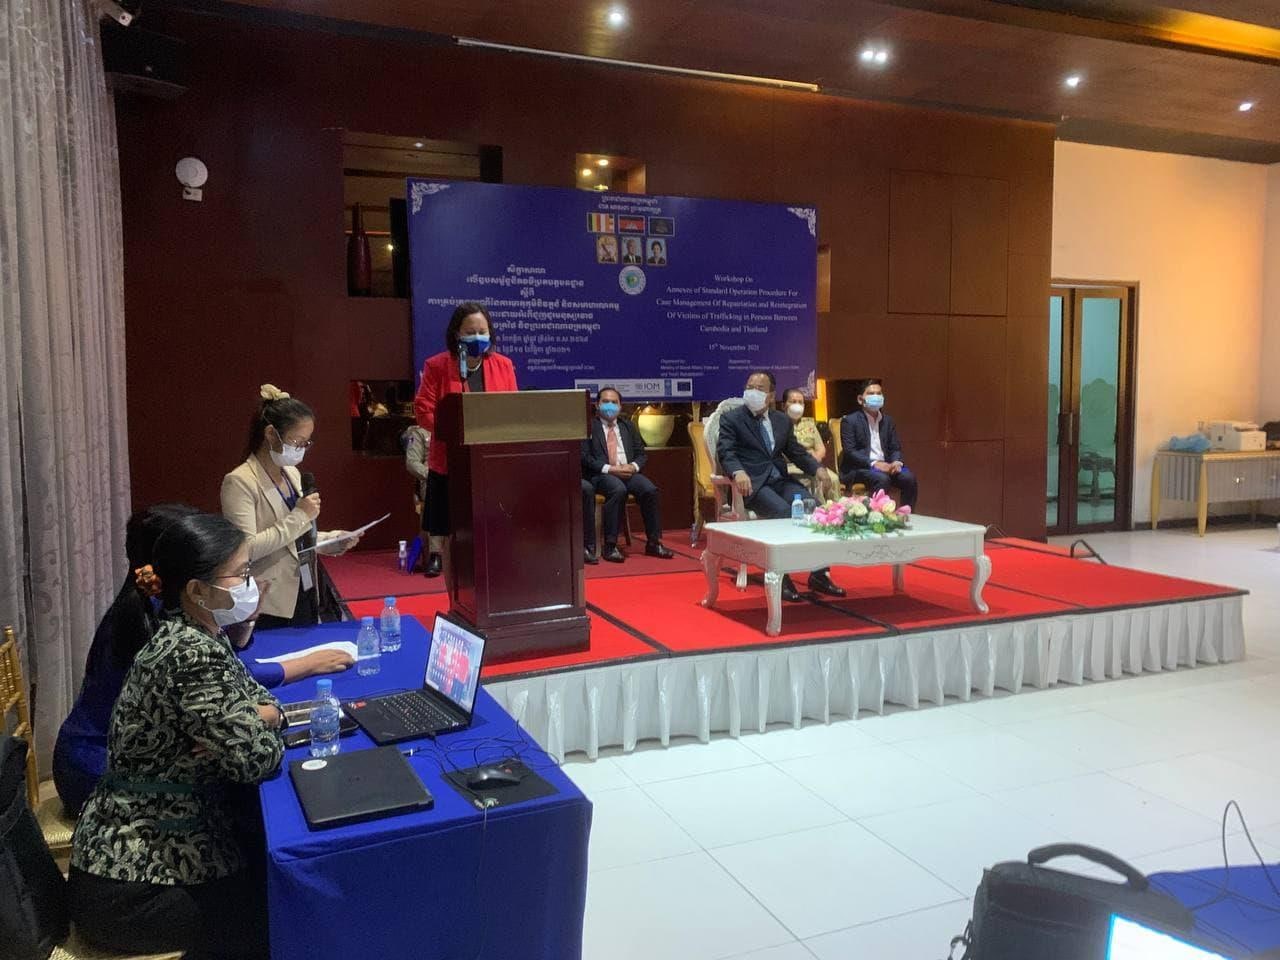 Senior Social Affairs Officer: The Royal Government of Cambodia is actively contributing to the fight against human trafficking in all forms, together with partners and citizens